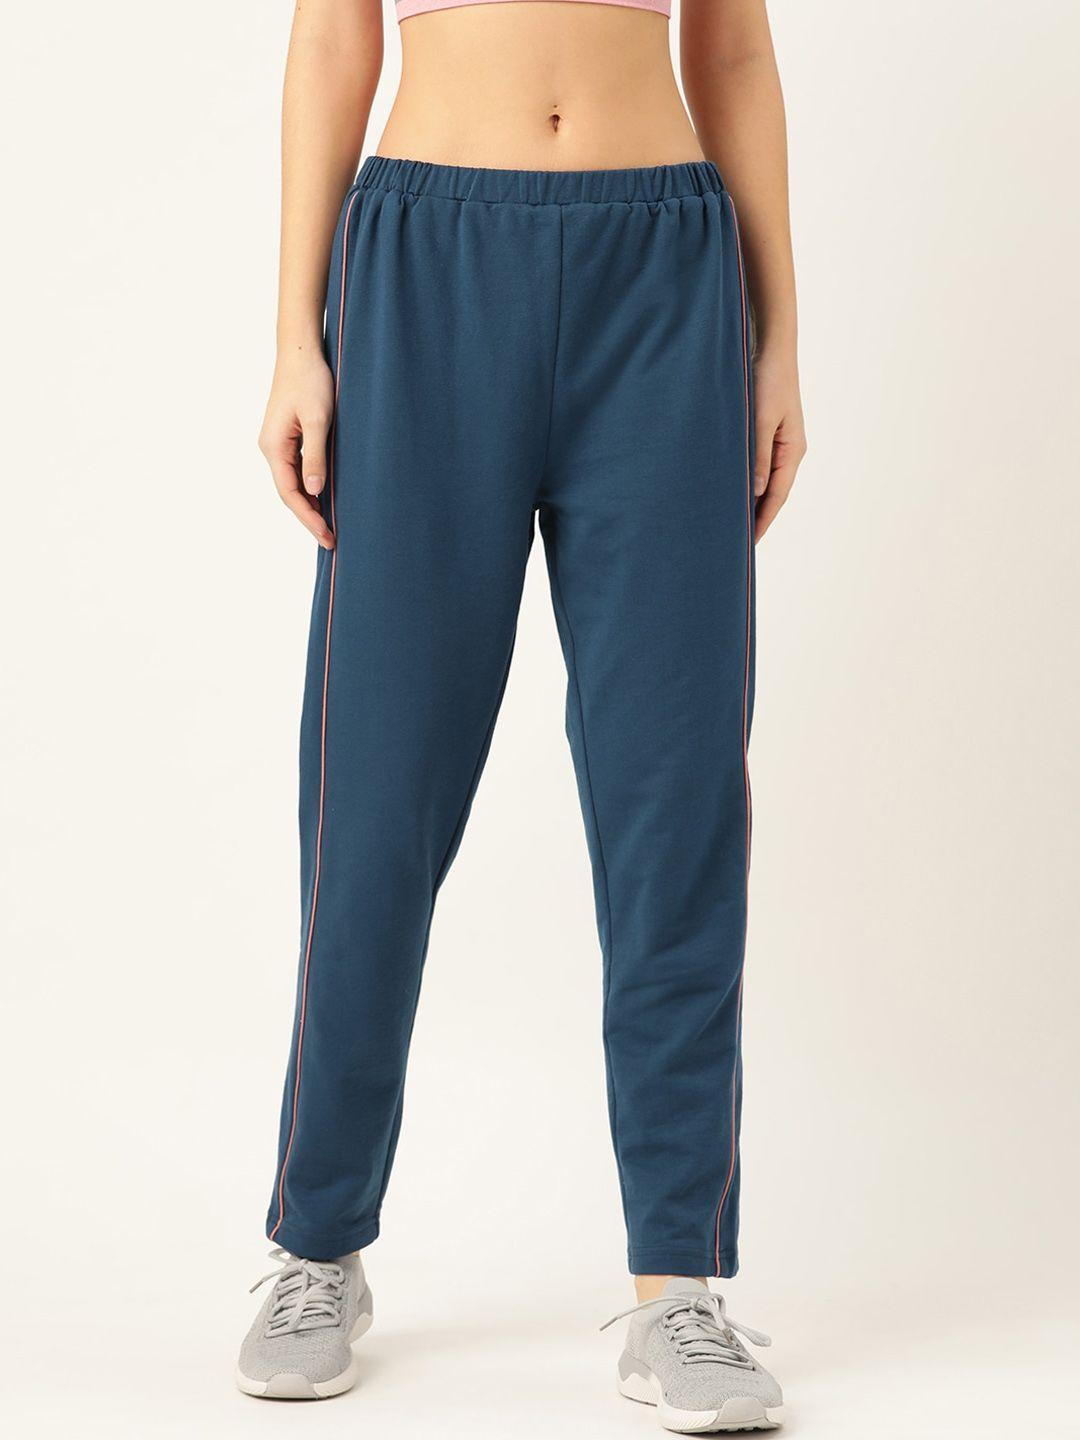 laabha-women-teal-blue-solid-straight-fit-track-pants